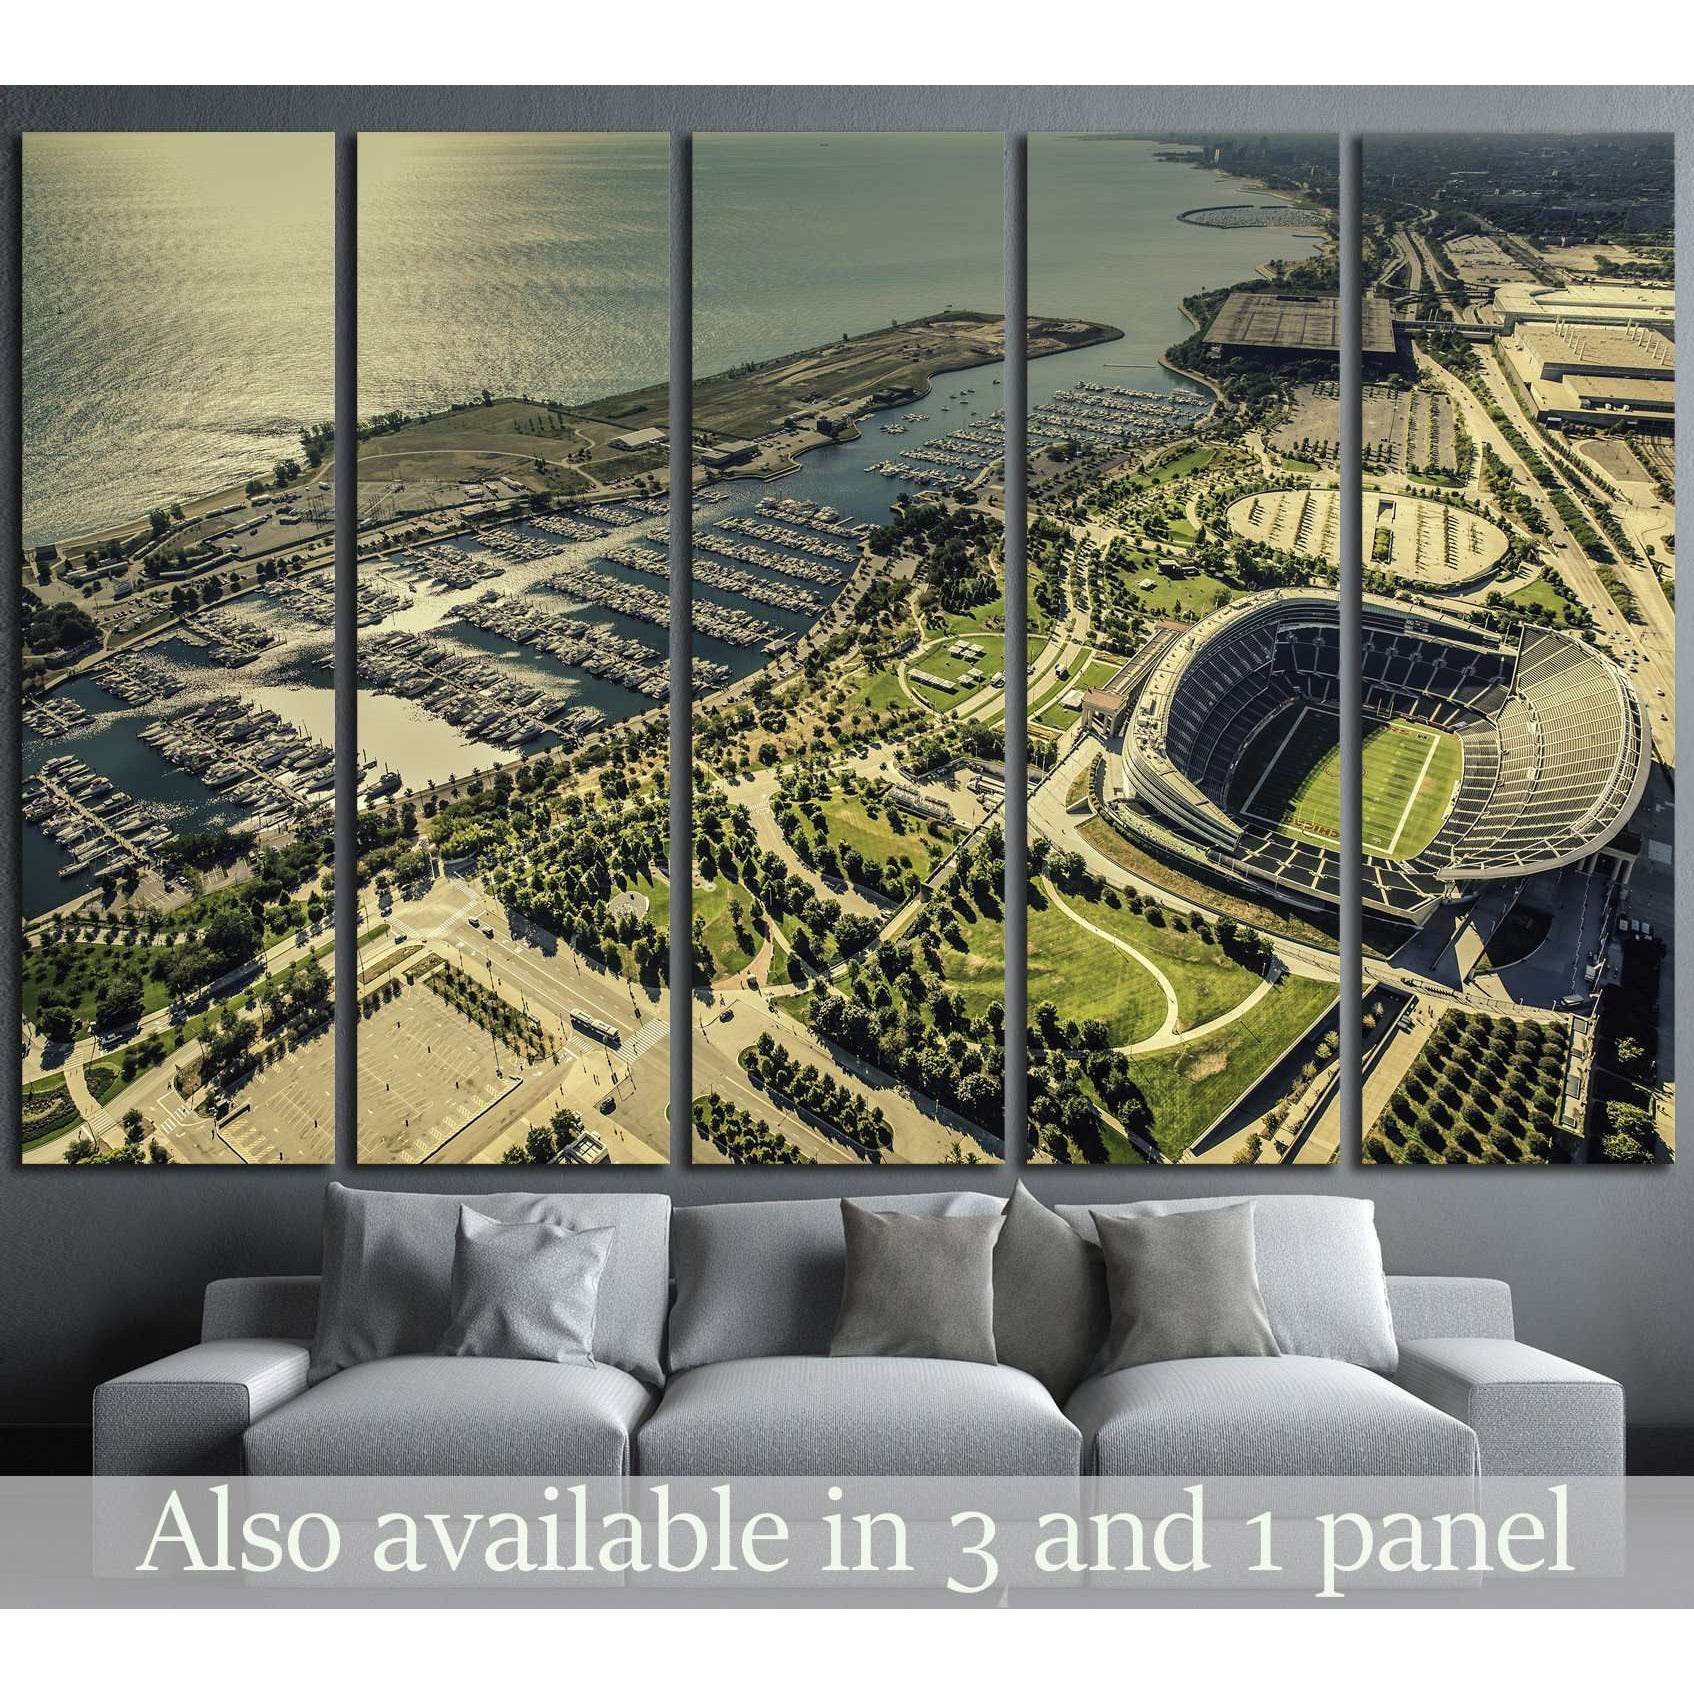 Chicago Soldiers Filed Stadium and harbor №2042 Ready to Hang Canvas Print